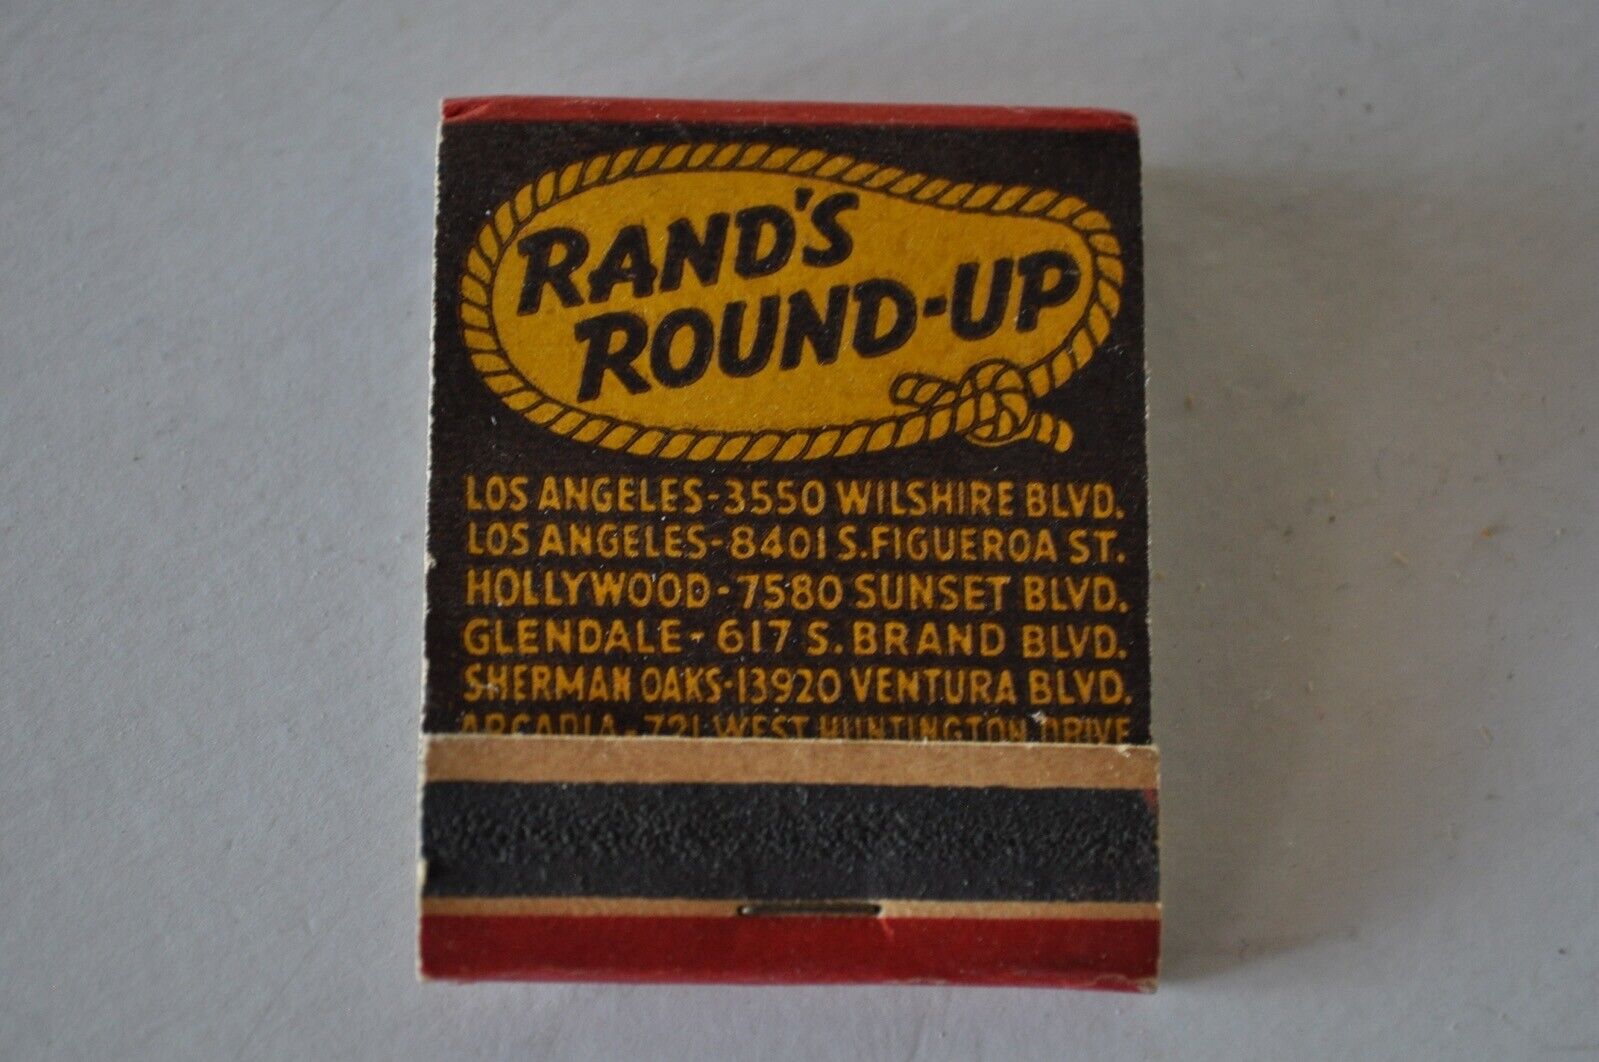 Vintage Matchbook Rand’s Round Up / Chuck Wagon Food Complete Unstruck